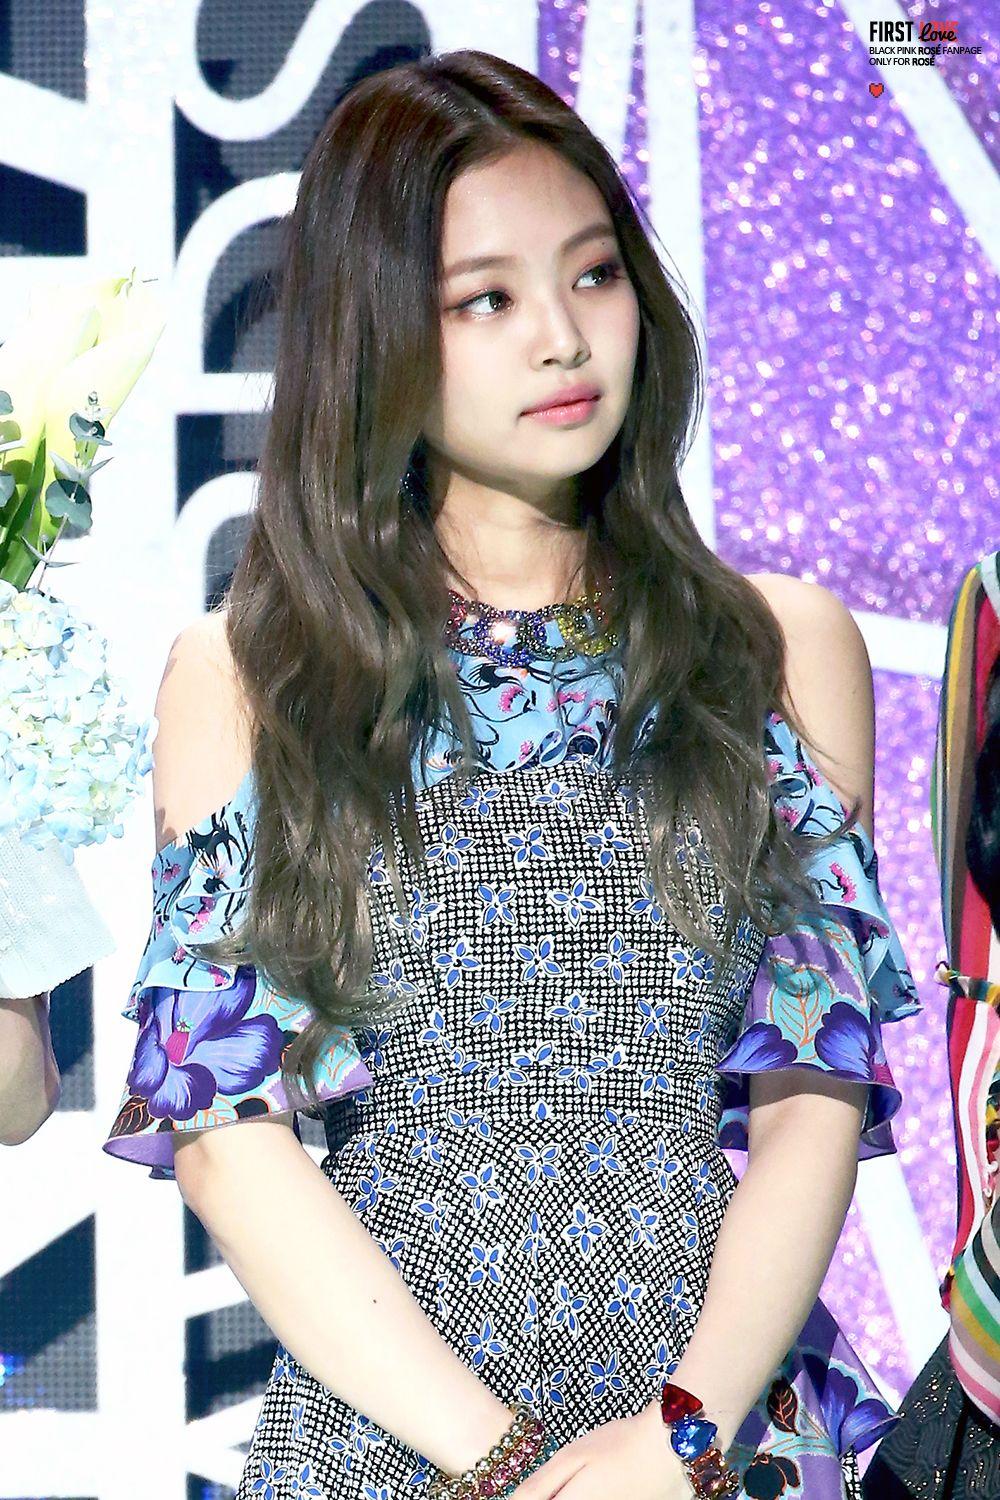 Jennie Kim Wallpaper : Jennie Kim Android/iPhone Wallpaper #129826 - Asiachan ... / If you have one of your own you'd like to share.